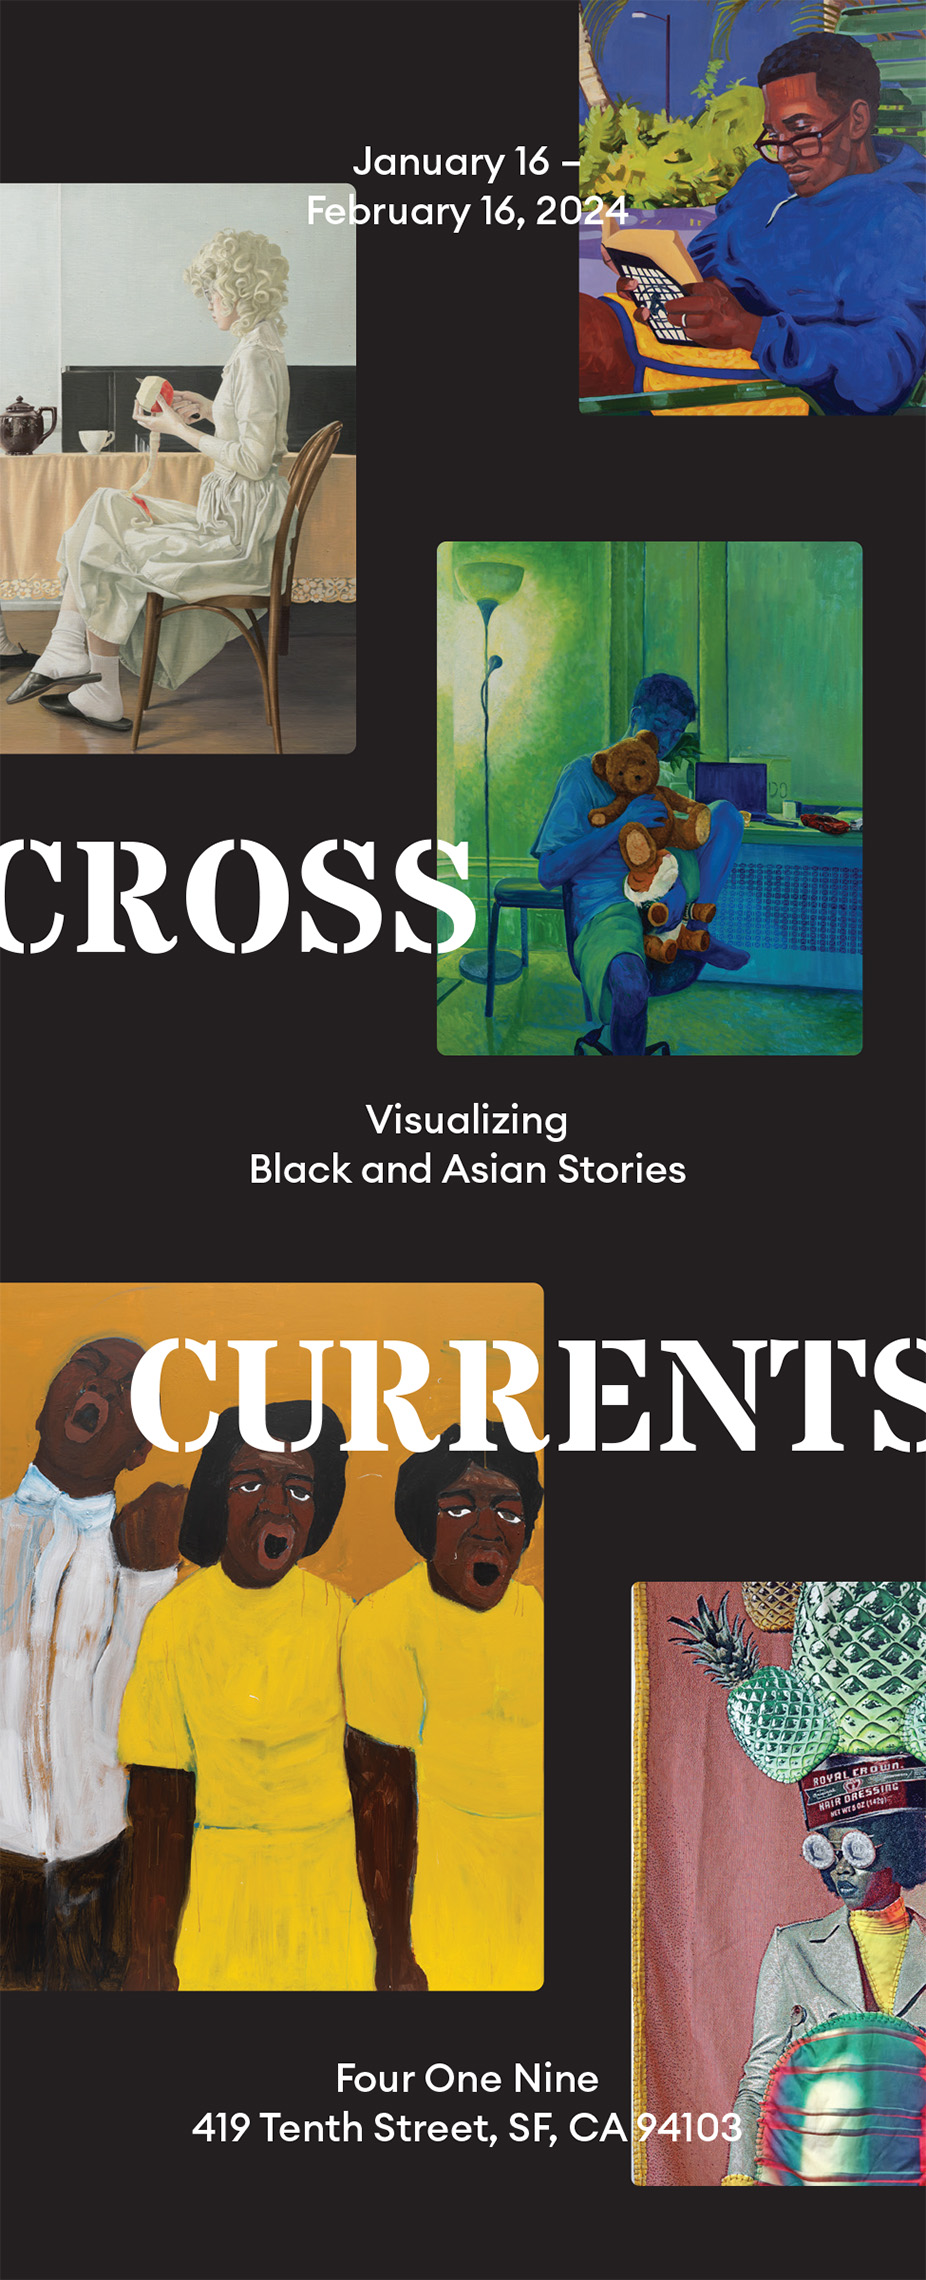 "CROSS CURRENTS" displays text and cartoon photos for an engaging and dynamic presentation.